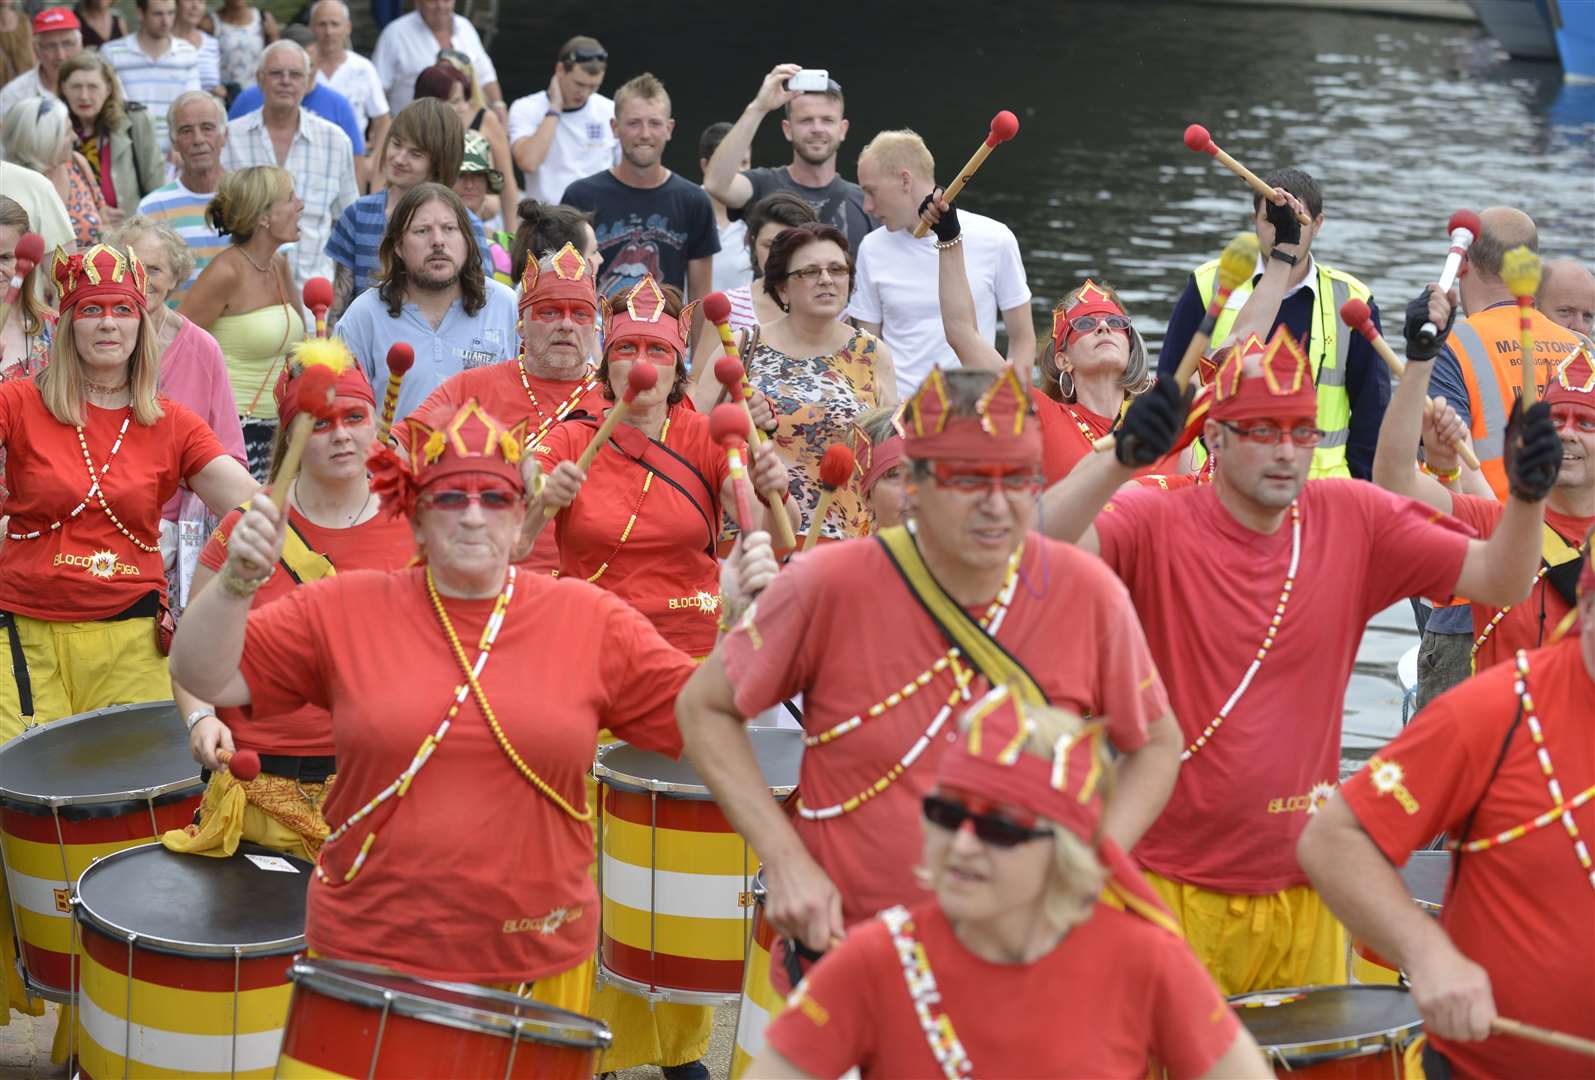 Bloco Fogo provide some samba beats along the river bank. Hundreds enjoy this years Maidstone River Festival 2013. Picture: Martin Apps